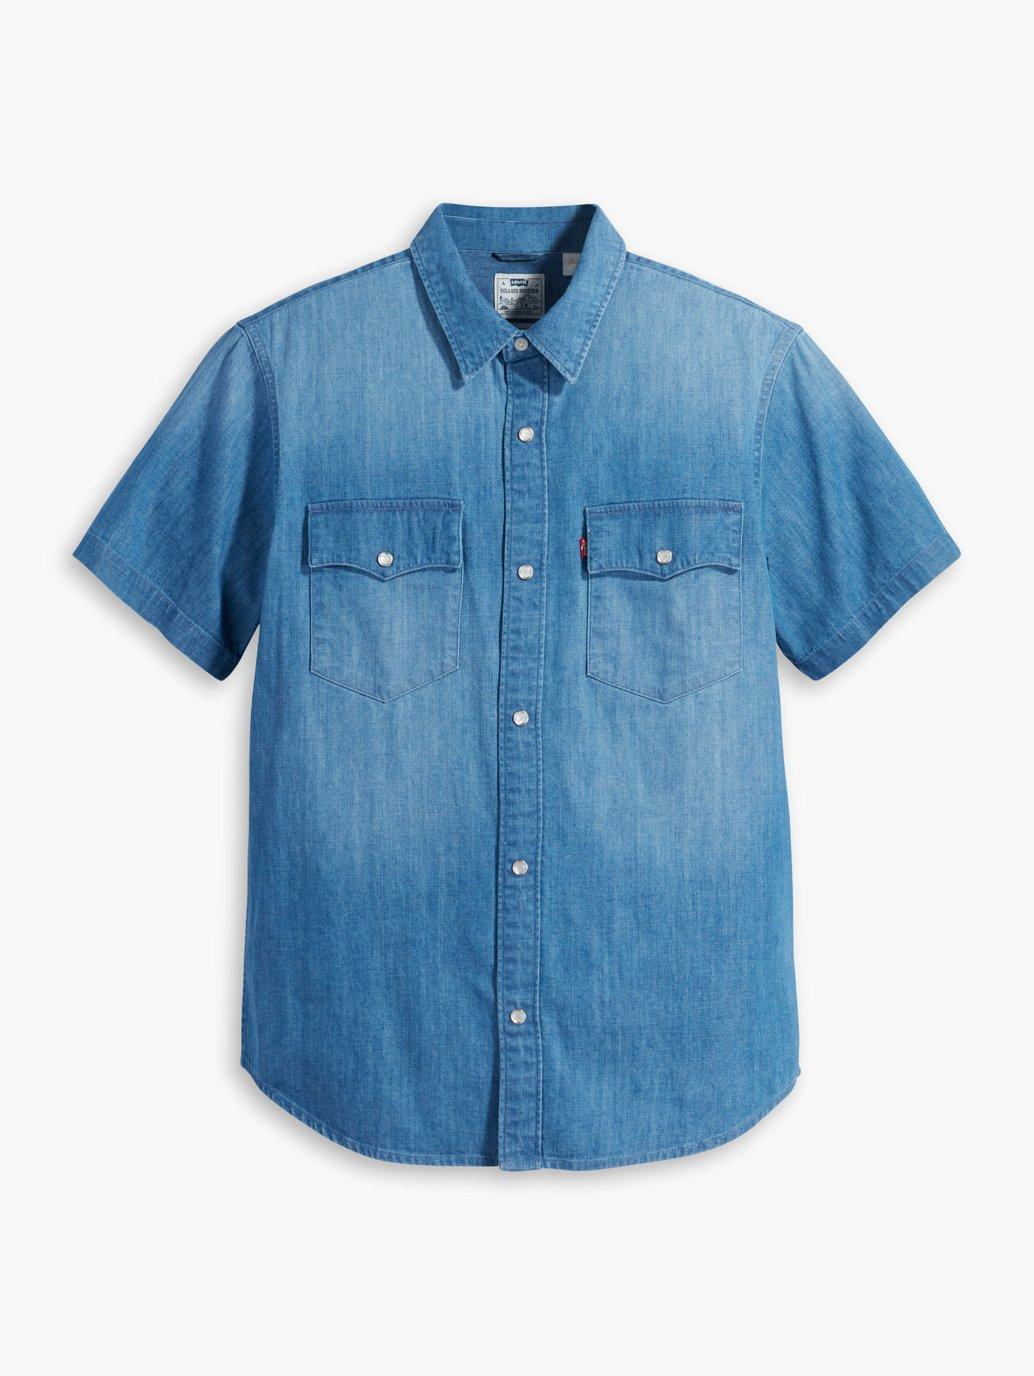 Buy Levis Mens Short Sleeve Relaxed Fit Western Shirt | Levi’s Official ...